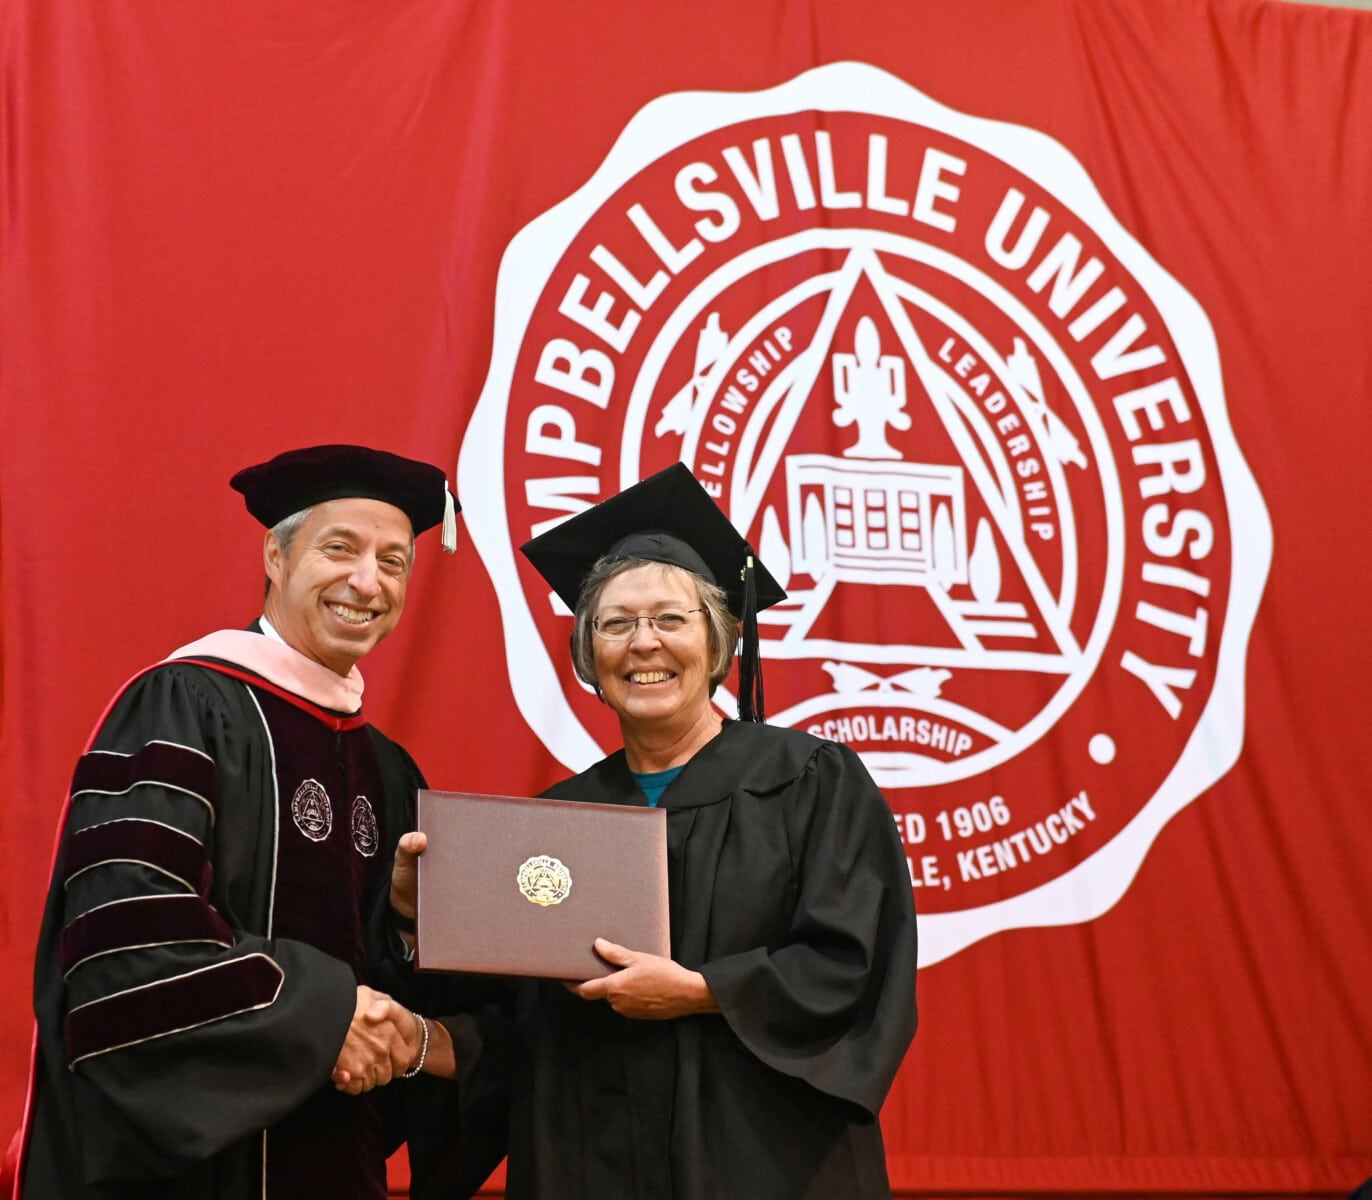 campbellsville-university-custodian-receives-degree-after-stopping